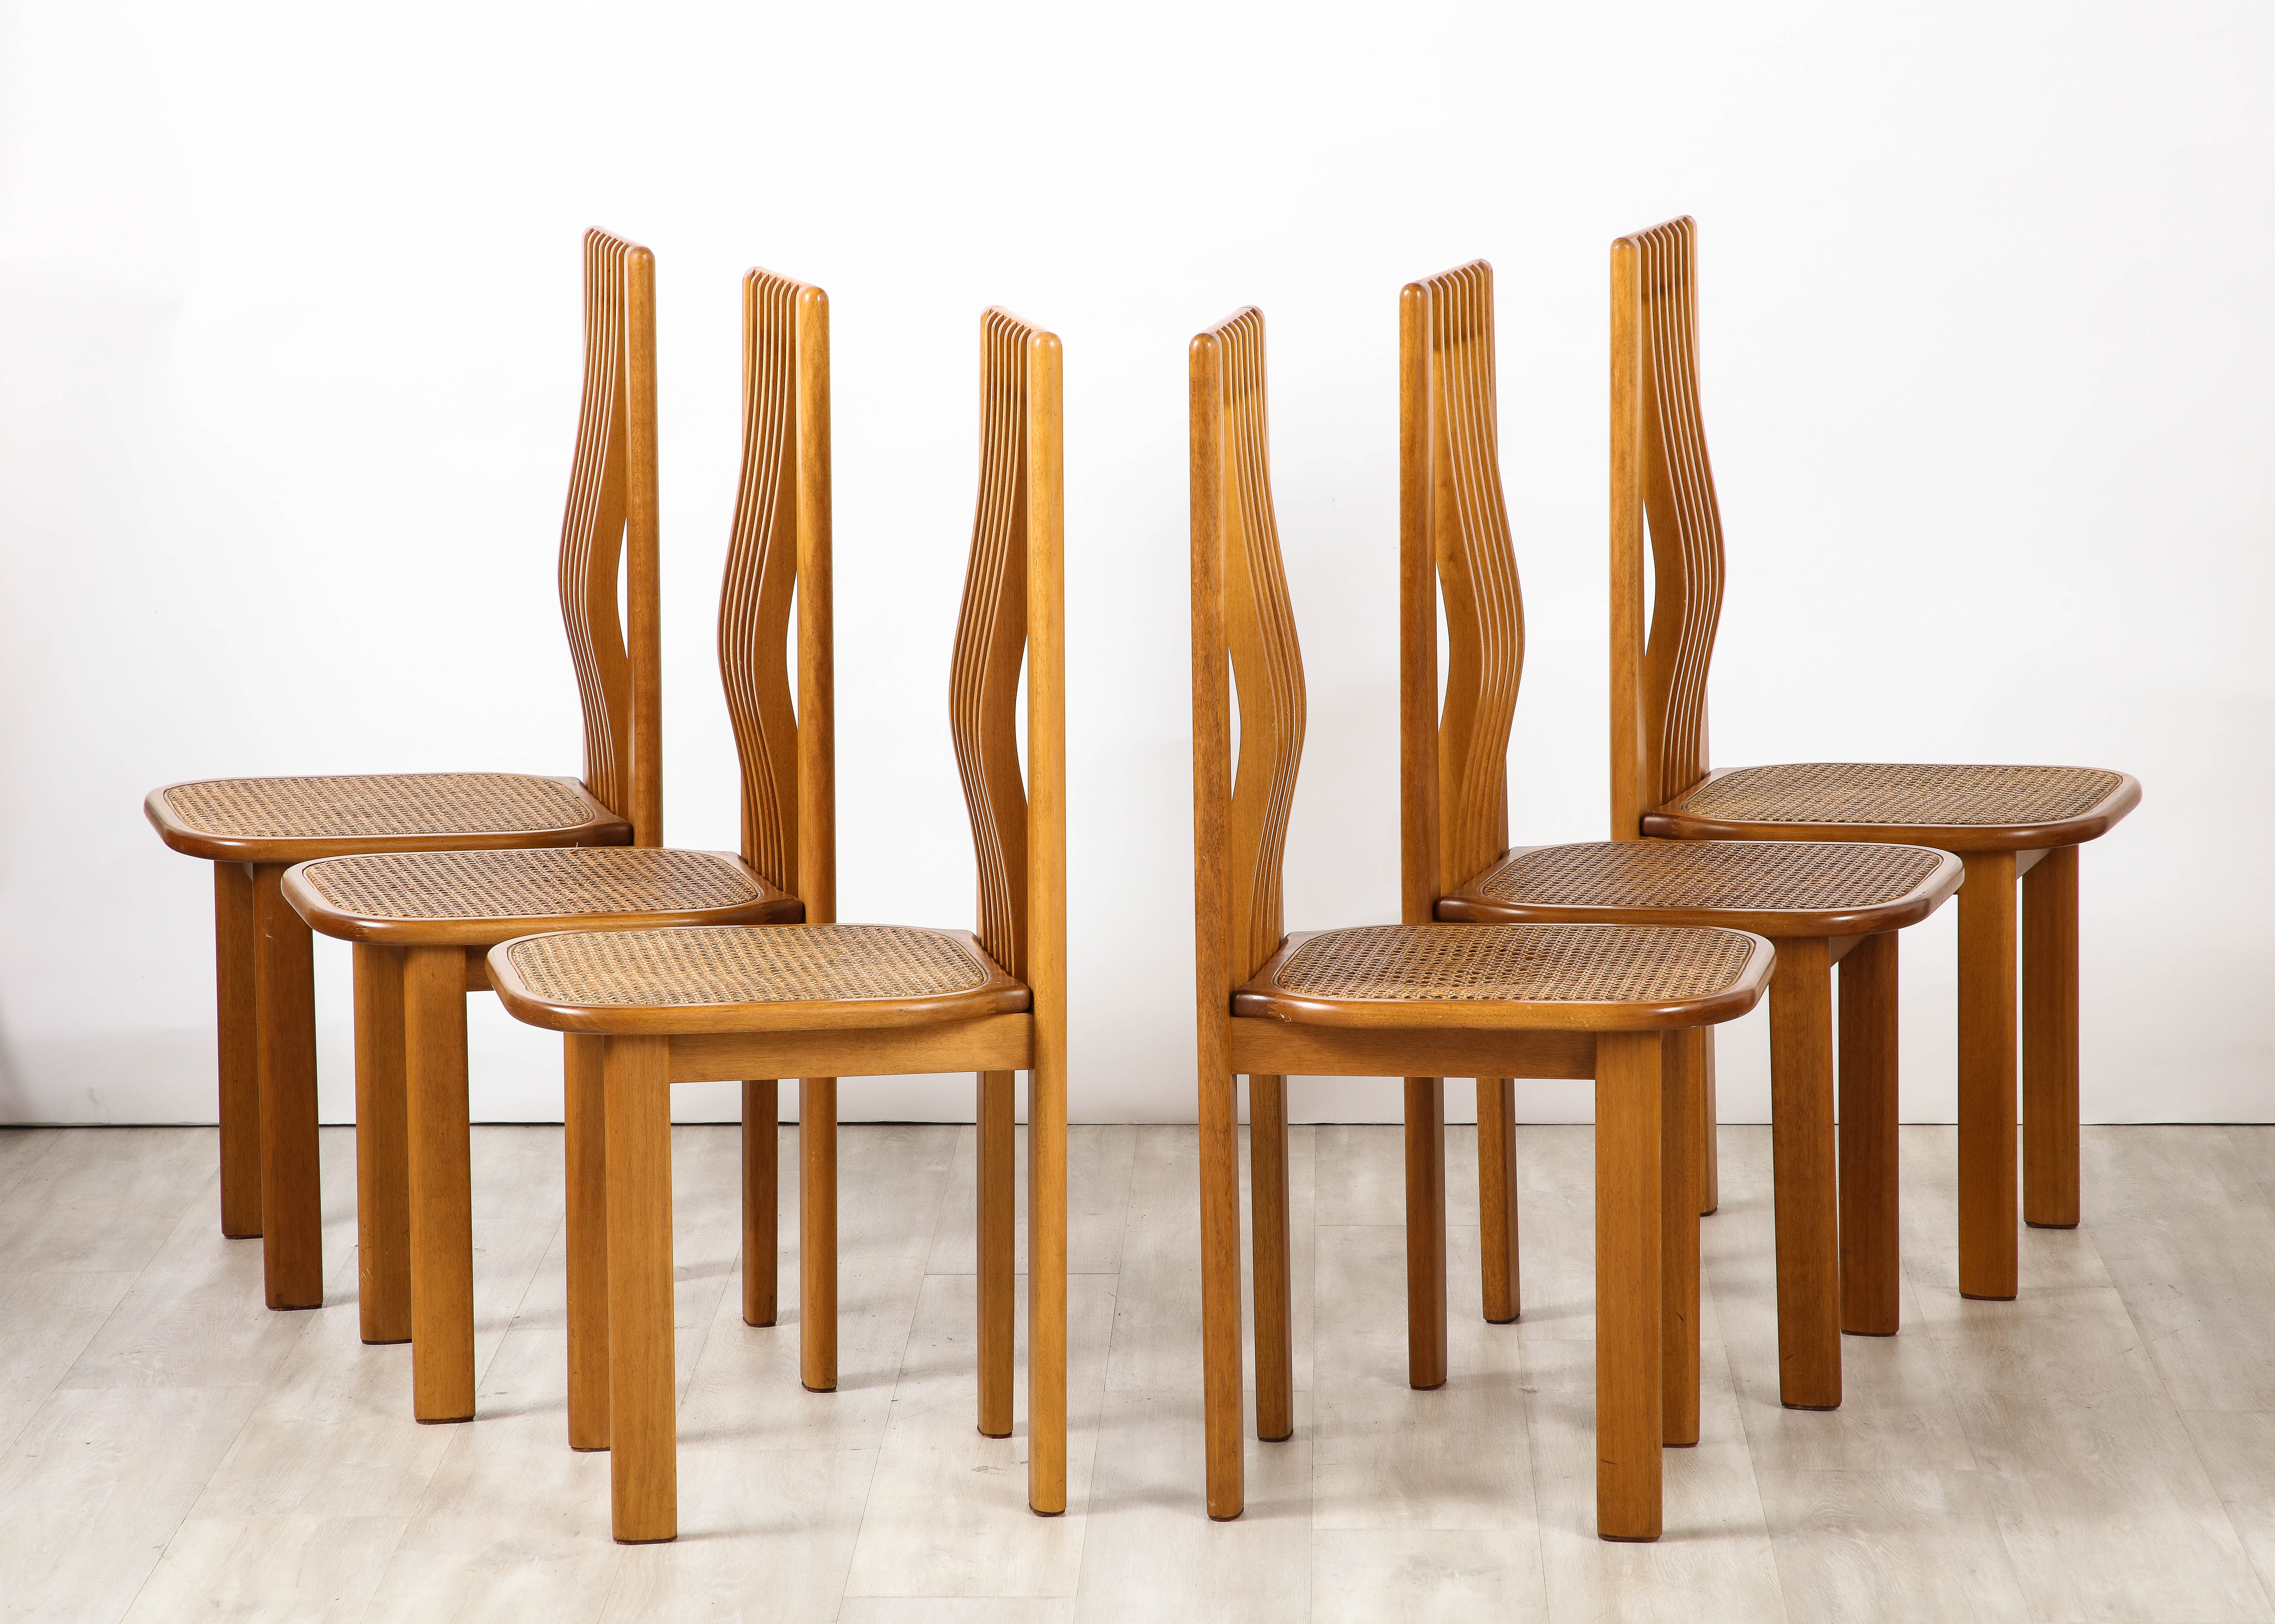 An Italian 1970's set of six dining chairs in maple with caned seats, the high backs are slatted with the mid-section indented forward, molding to your back. The cane seats extend slightly over the angled legs.   They are highly sculptural, sleek